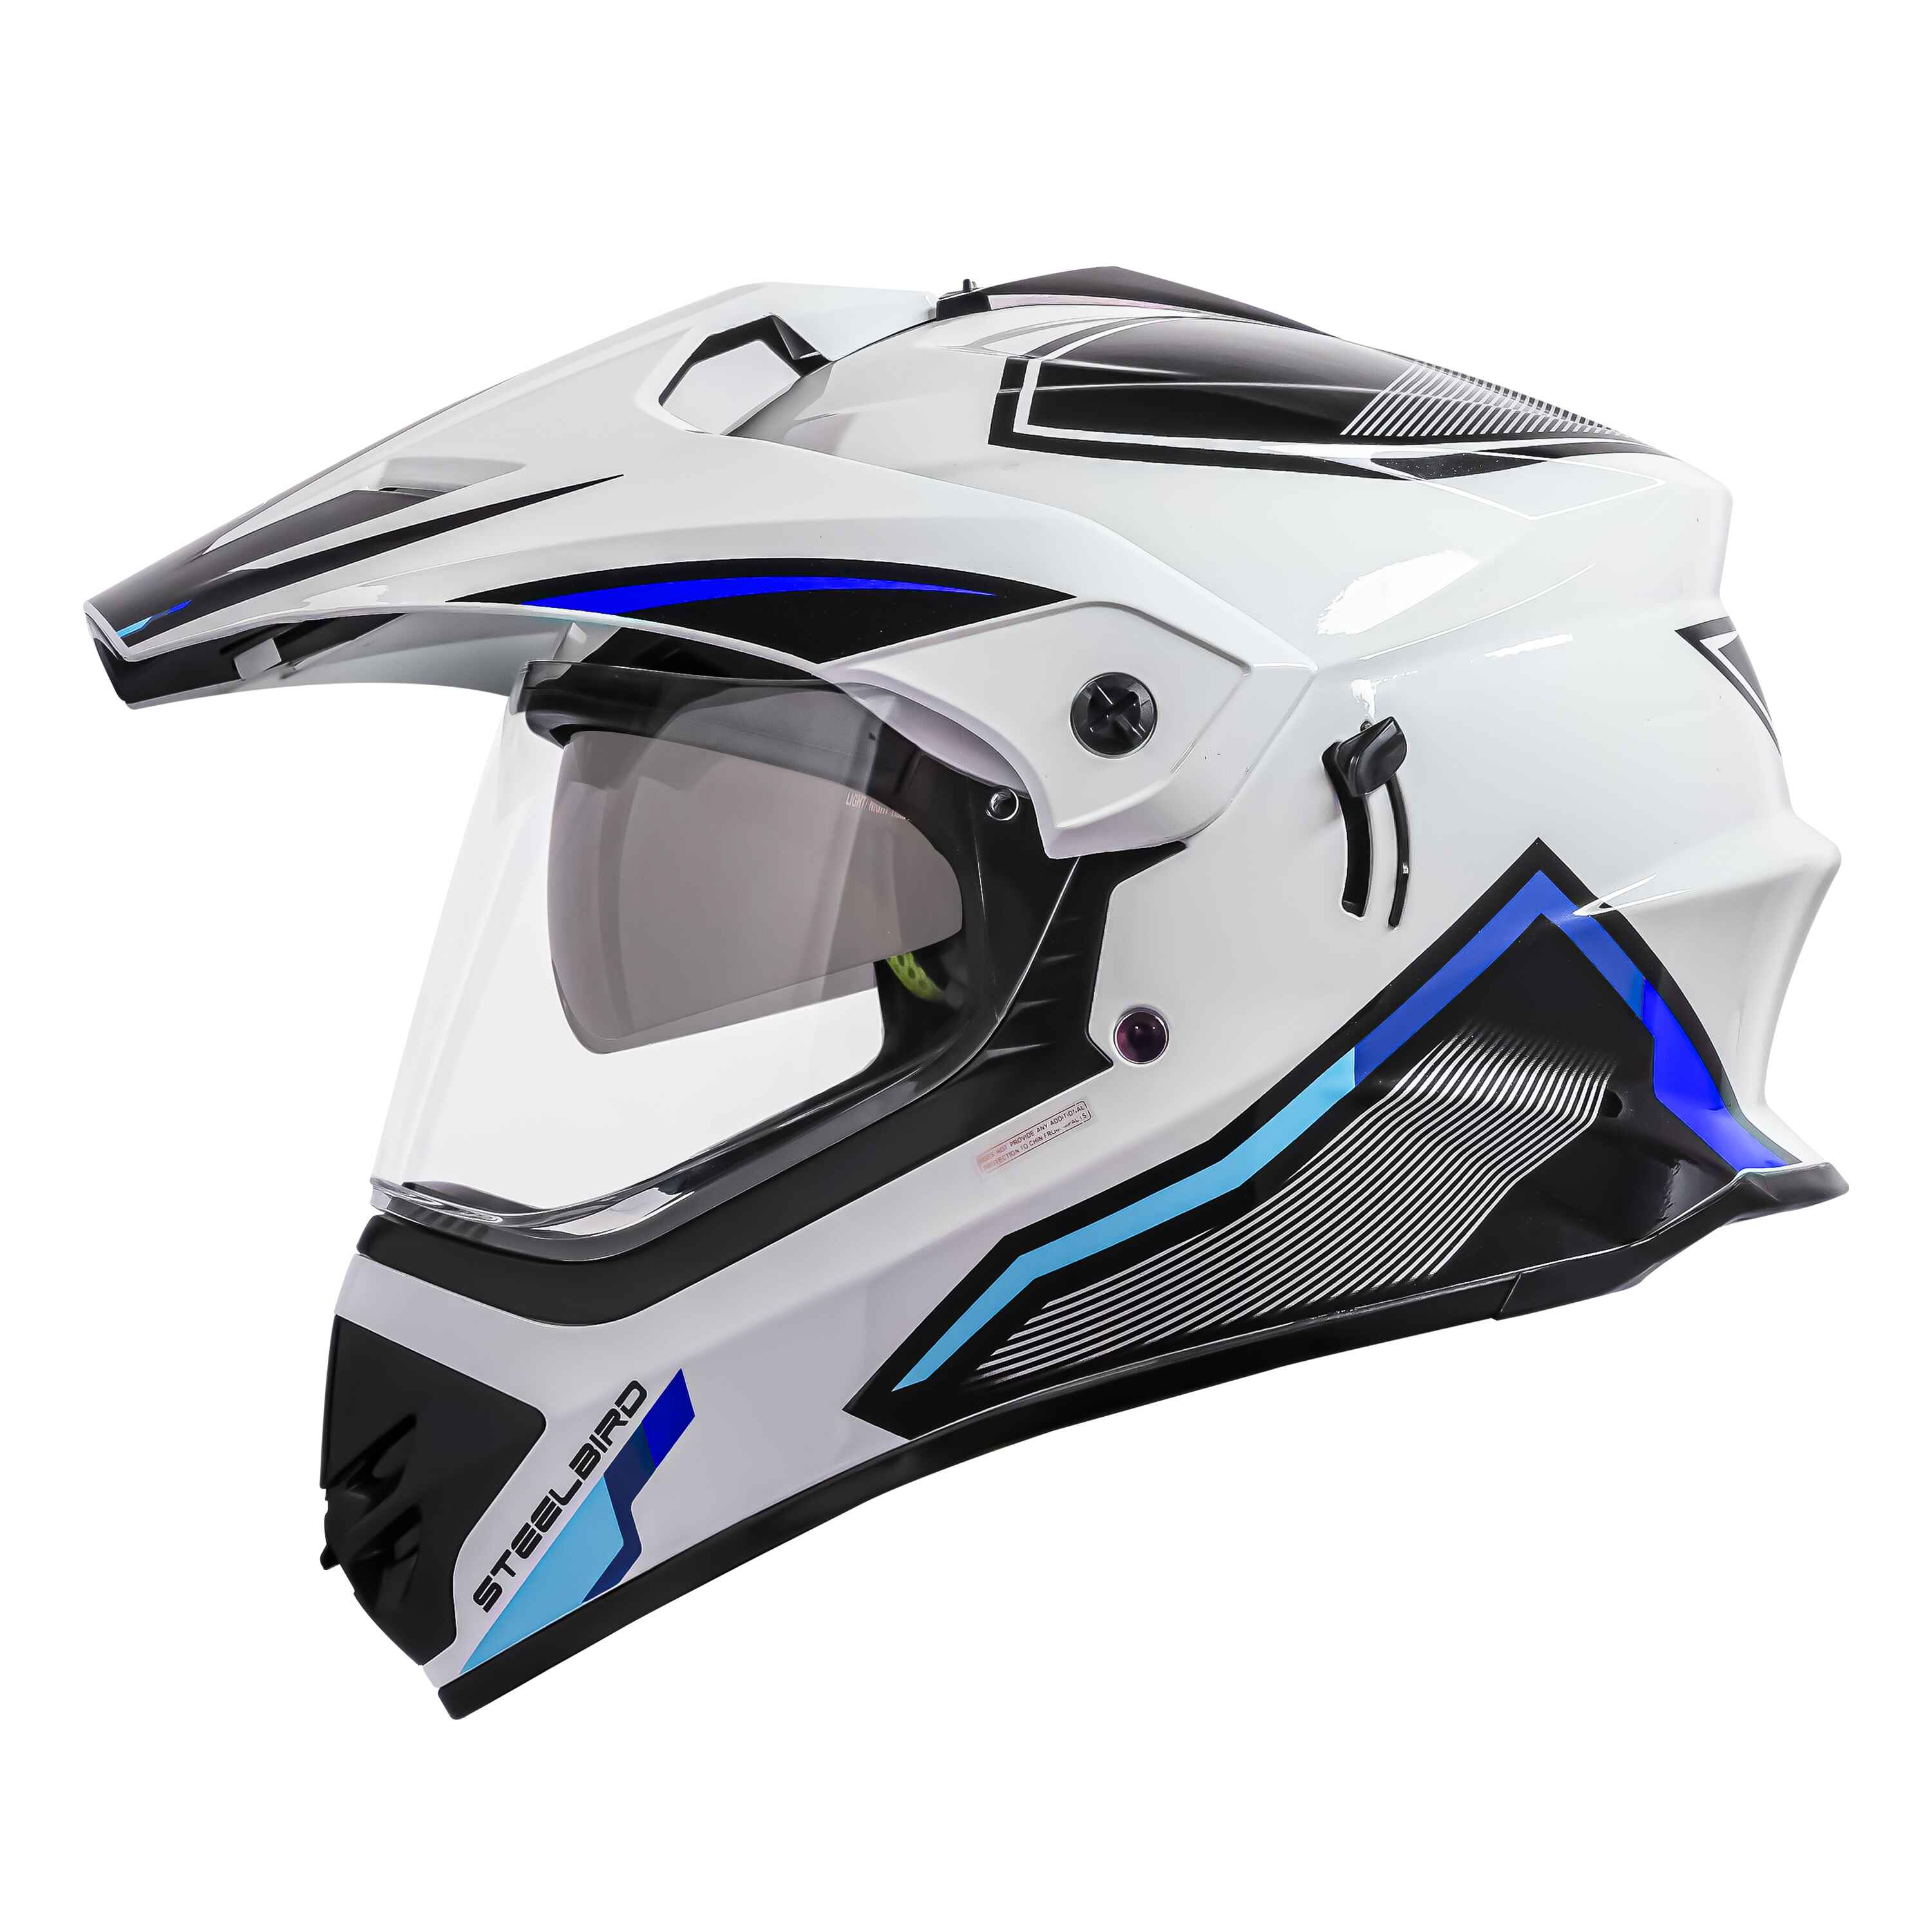 SBH-13 ISS RACER GLOSSY WHITE WITH BLUE 